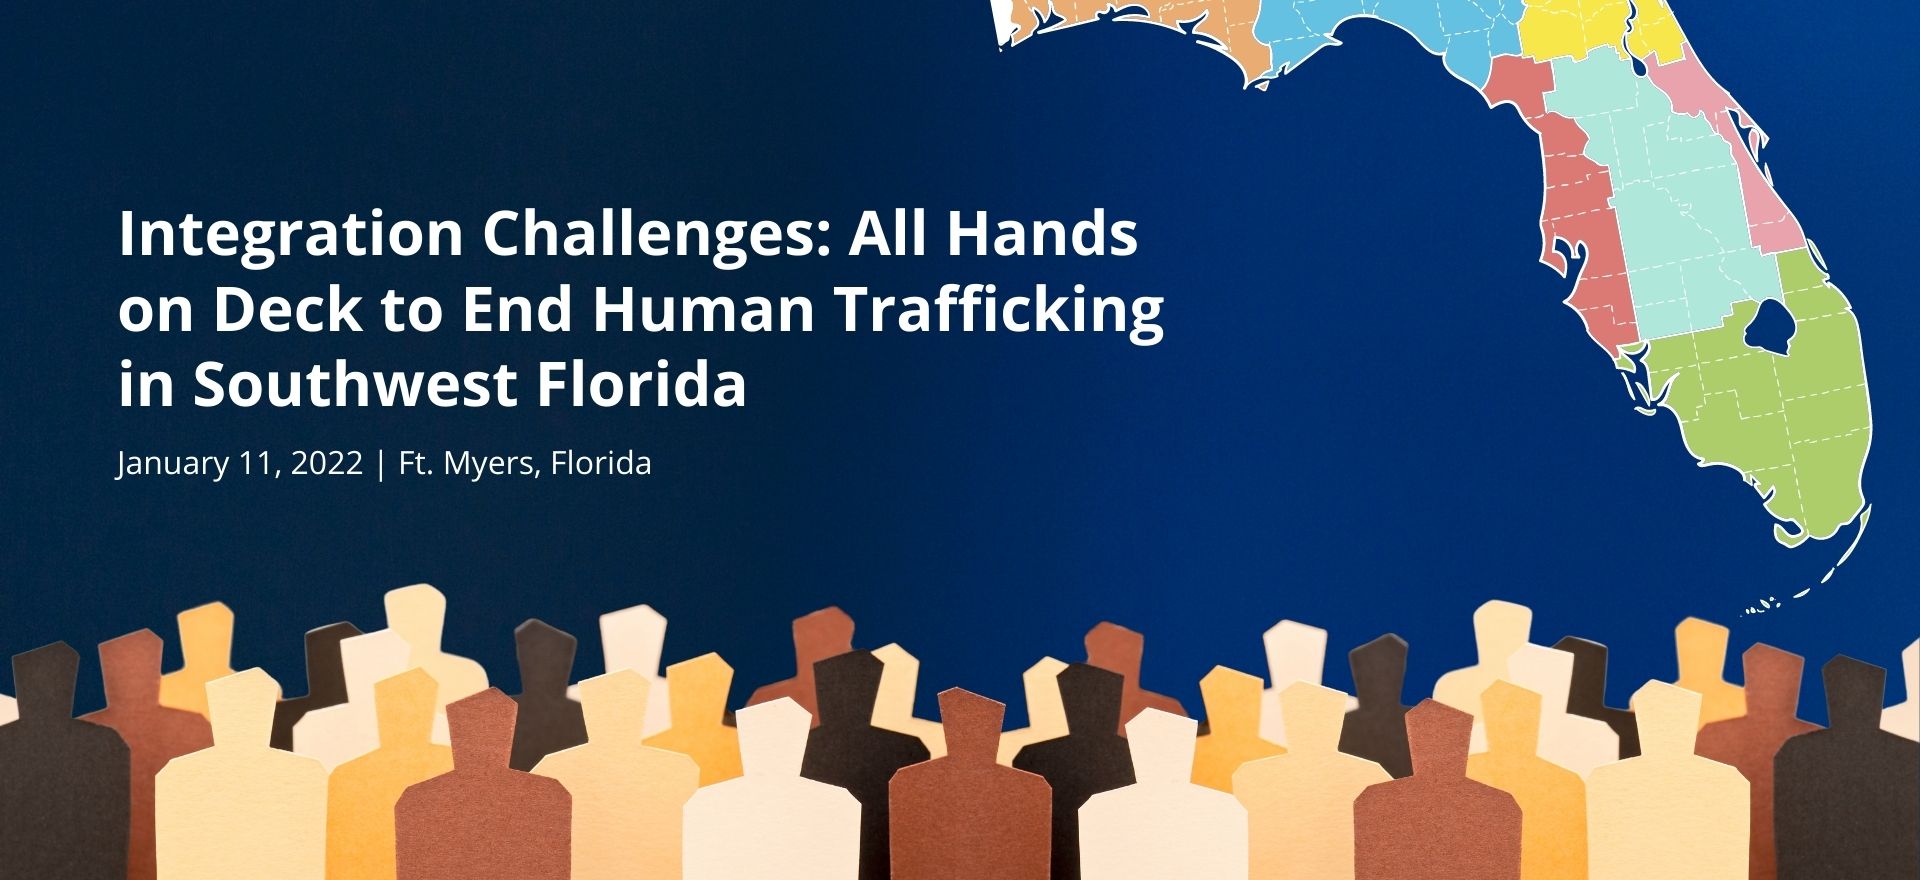 Kristi Lee Radio Porn - Integration Challenges: All Hands on Deck to End Human Trafficking in  Southwest Florida - Human Trafficking Academy